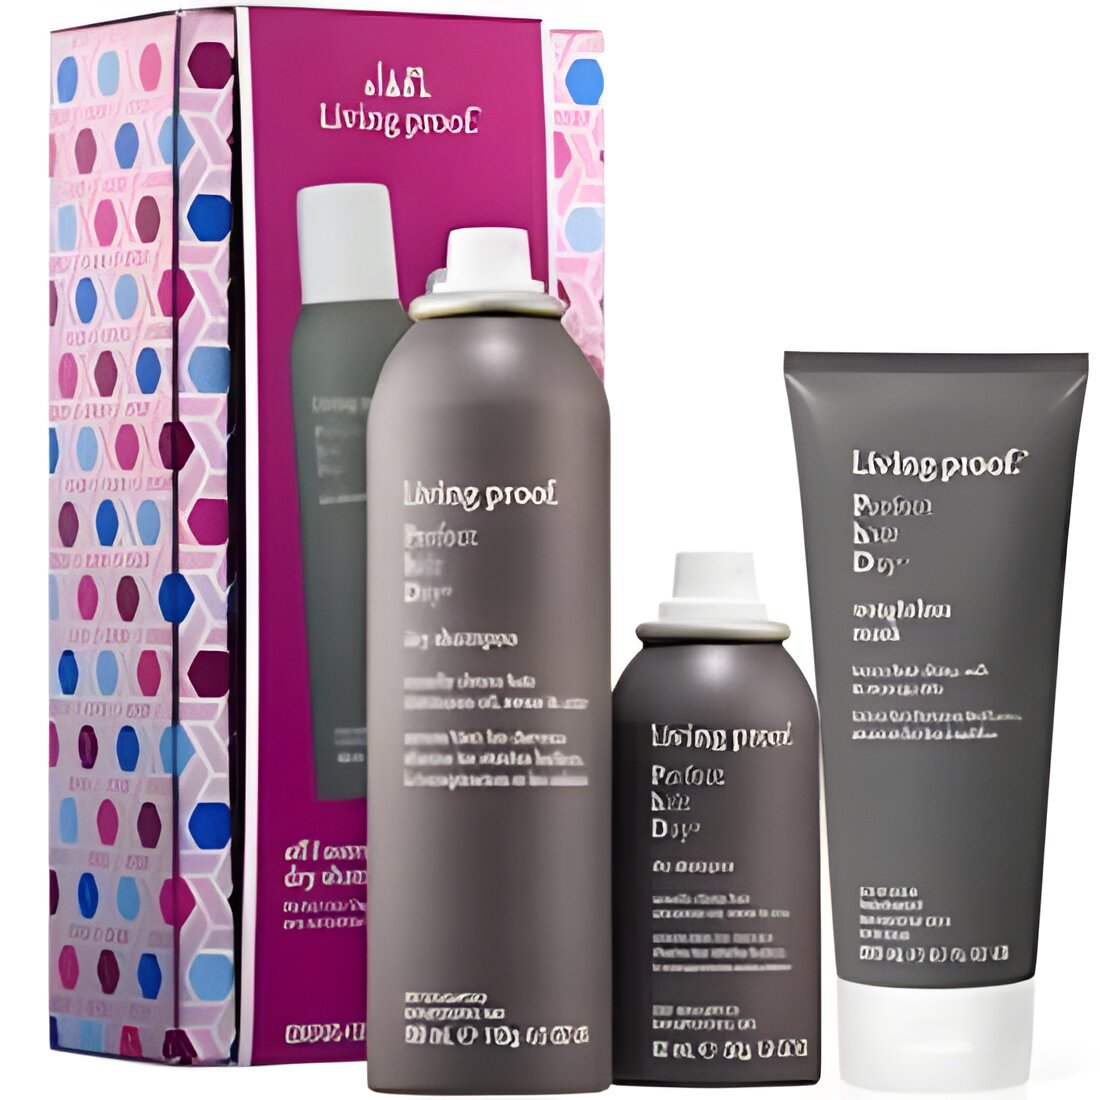 Free Living Proof Haircare Samples